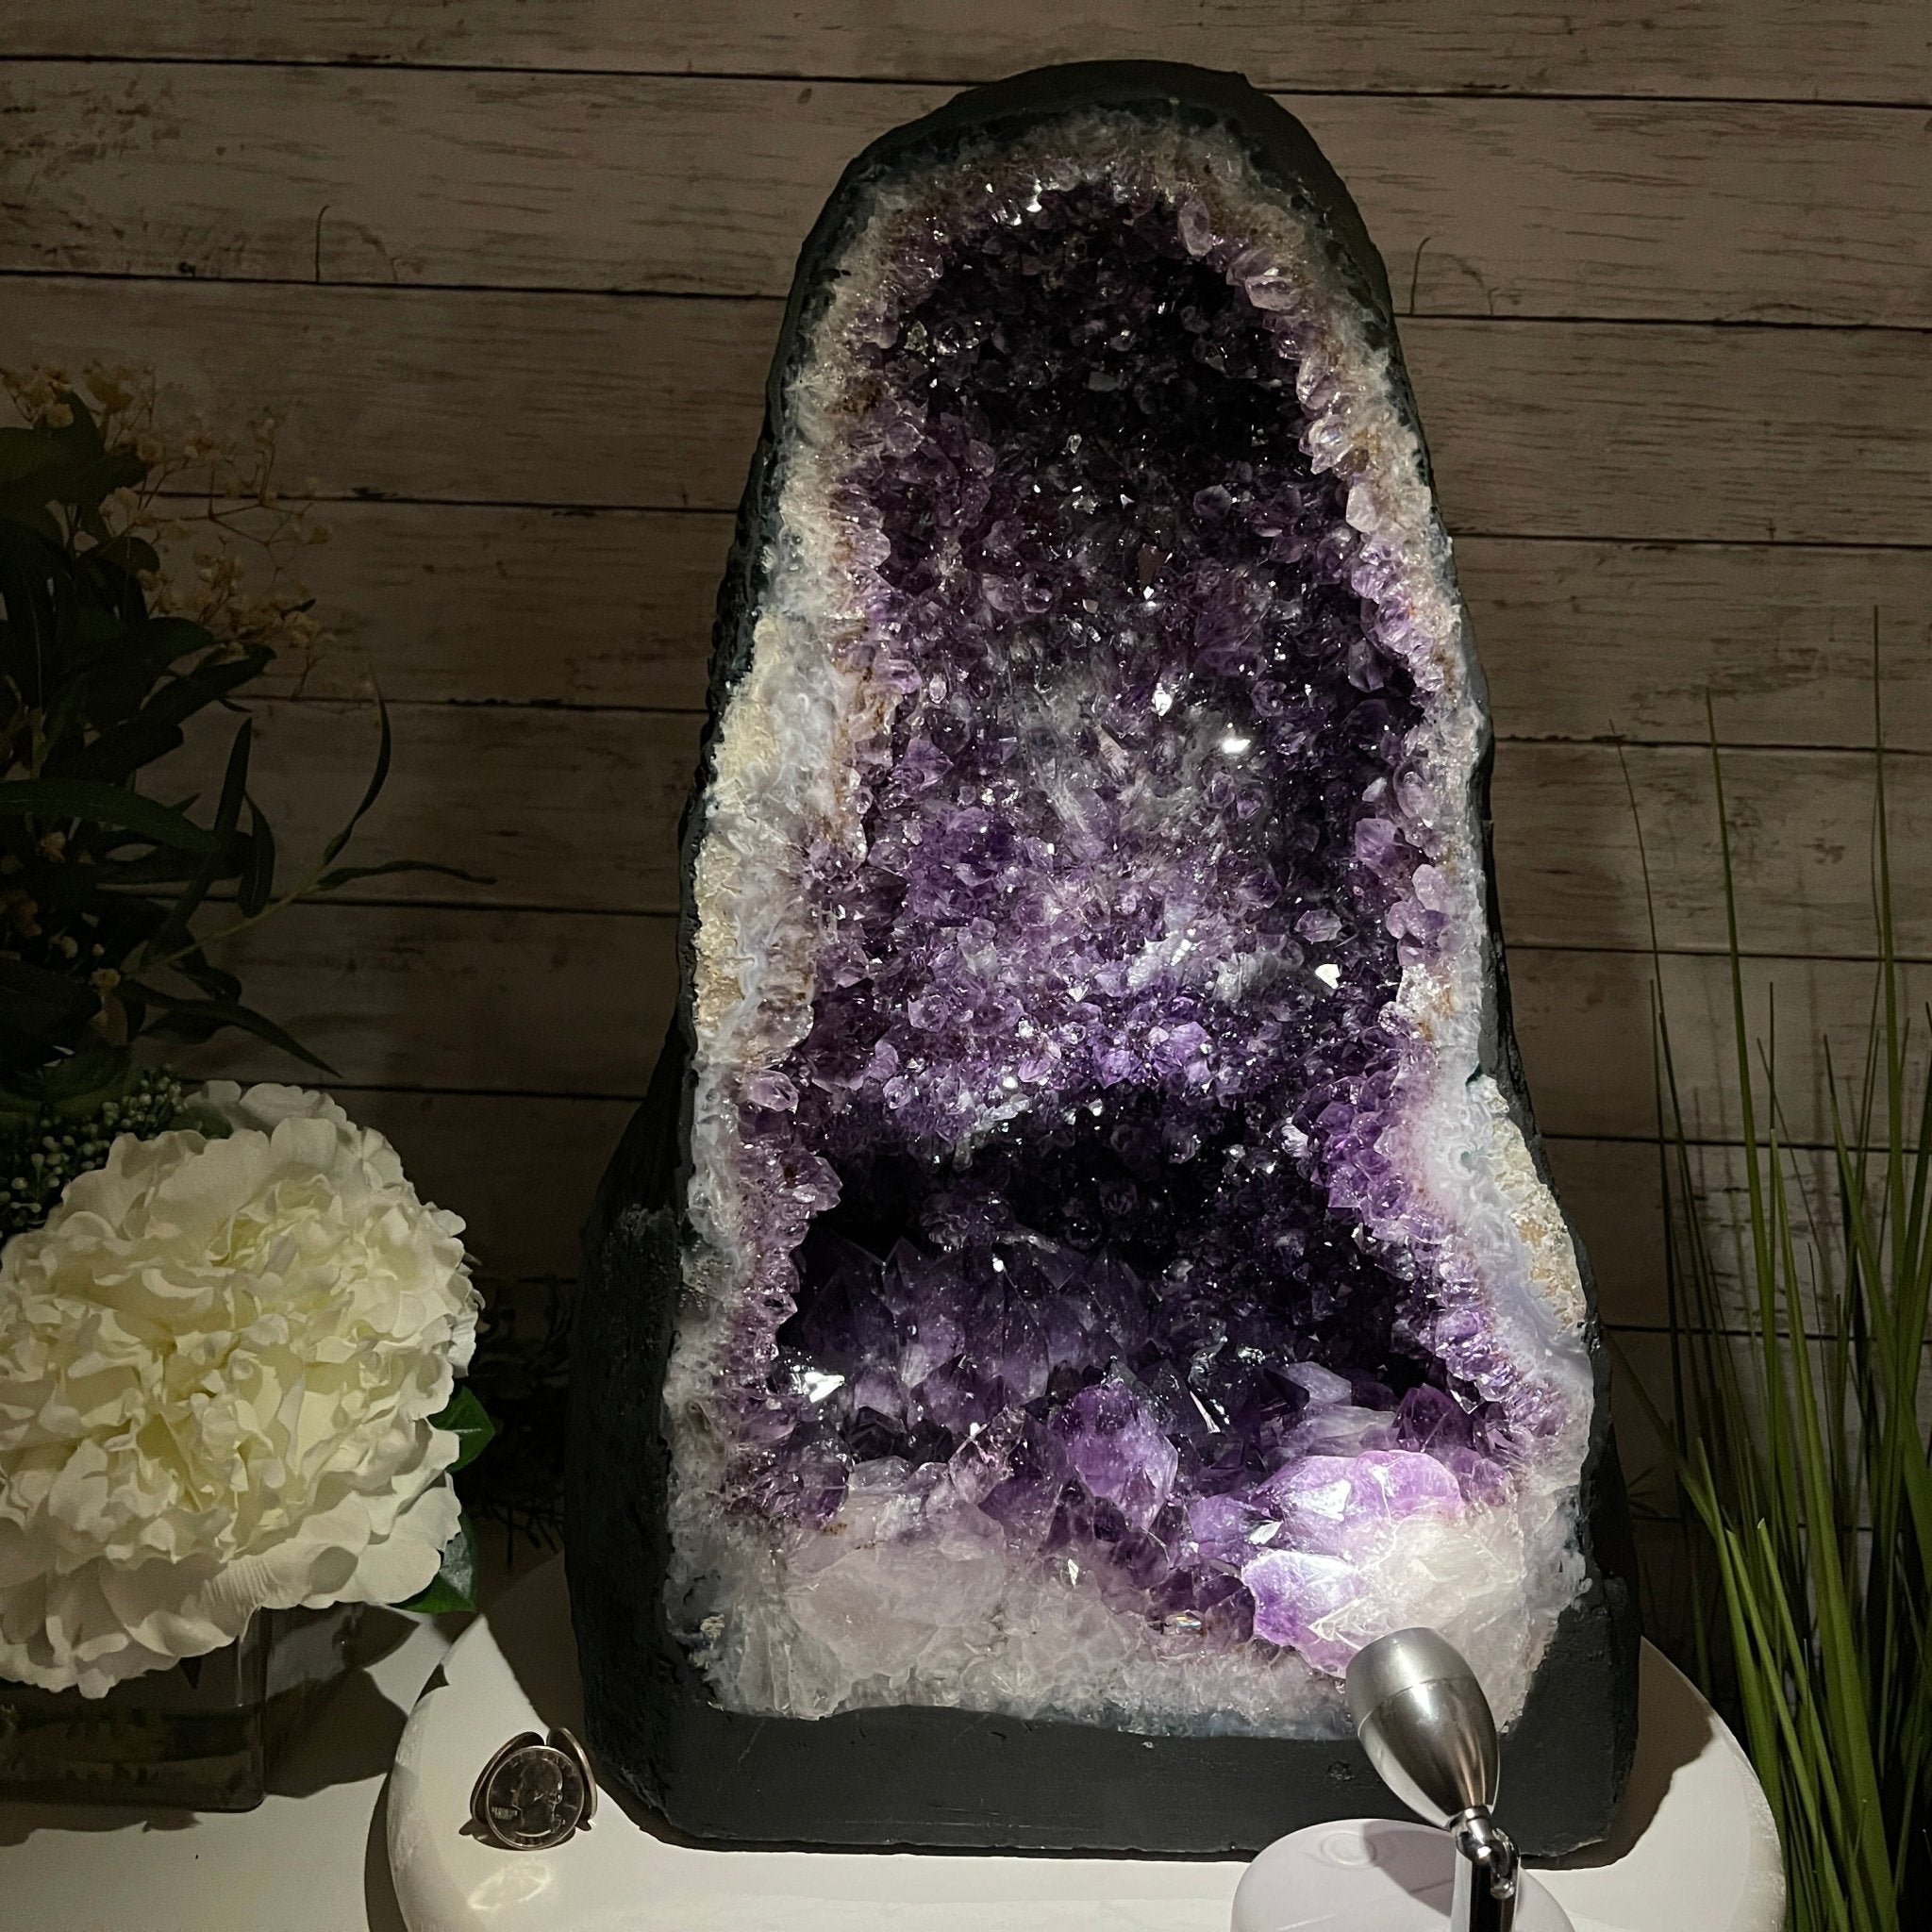 Extra Quality Brazilian Amethyst Cathedral, 17.5” tall & 62.4 lbs #5601-0643 by Brazil Gems - Brazil GemsBrazil GemsExtra Quality Brazilian Amethyst Cathedral, 17.5” tall & 62.4 lbs #5601-0643 by Brazil GemsCathedrals5601-0643